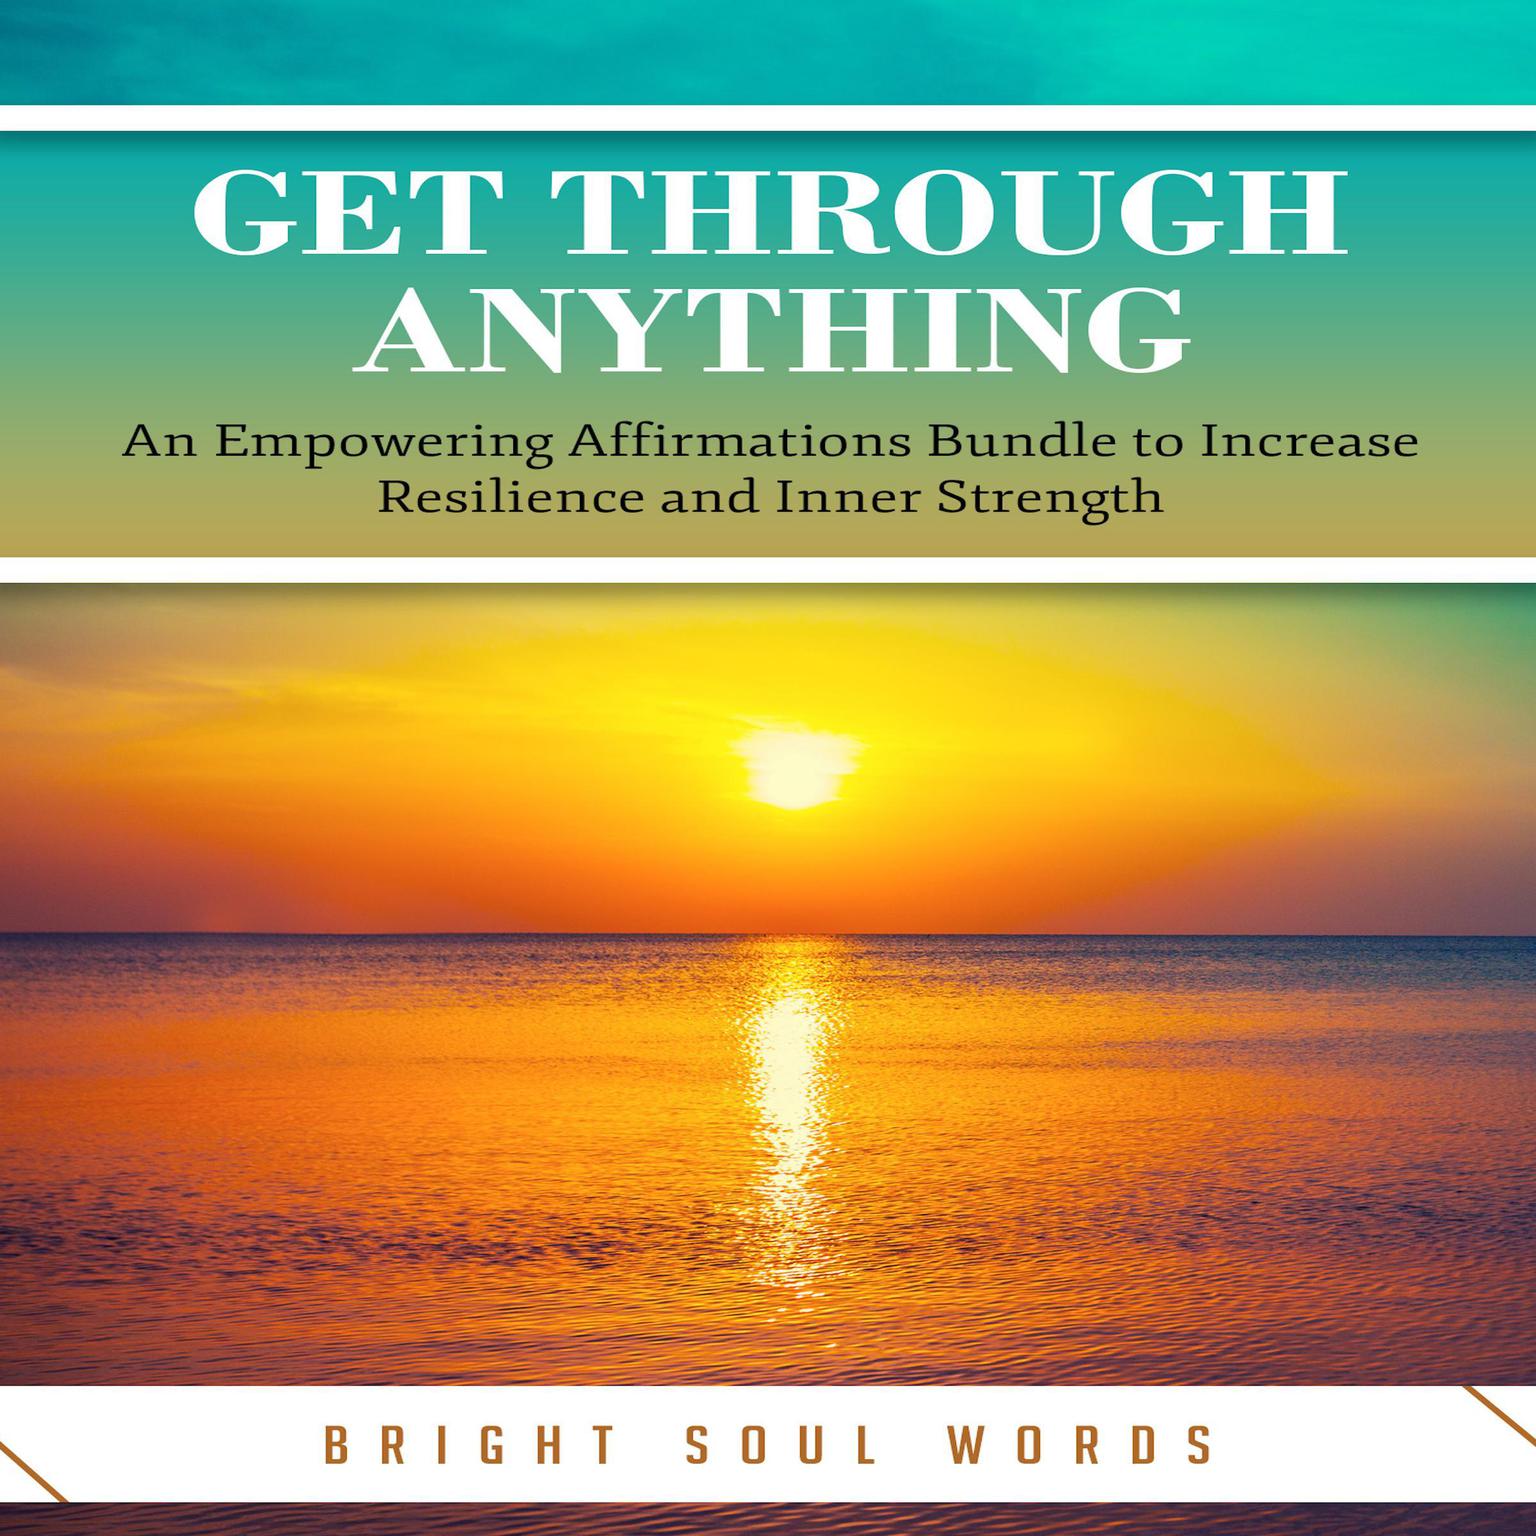 Get Through Anything: An Empowering Affirmations Bundle to Increase Resilience and Inner Strength Audiobook, by Bright Soul Words